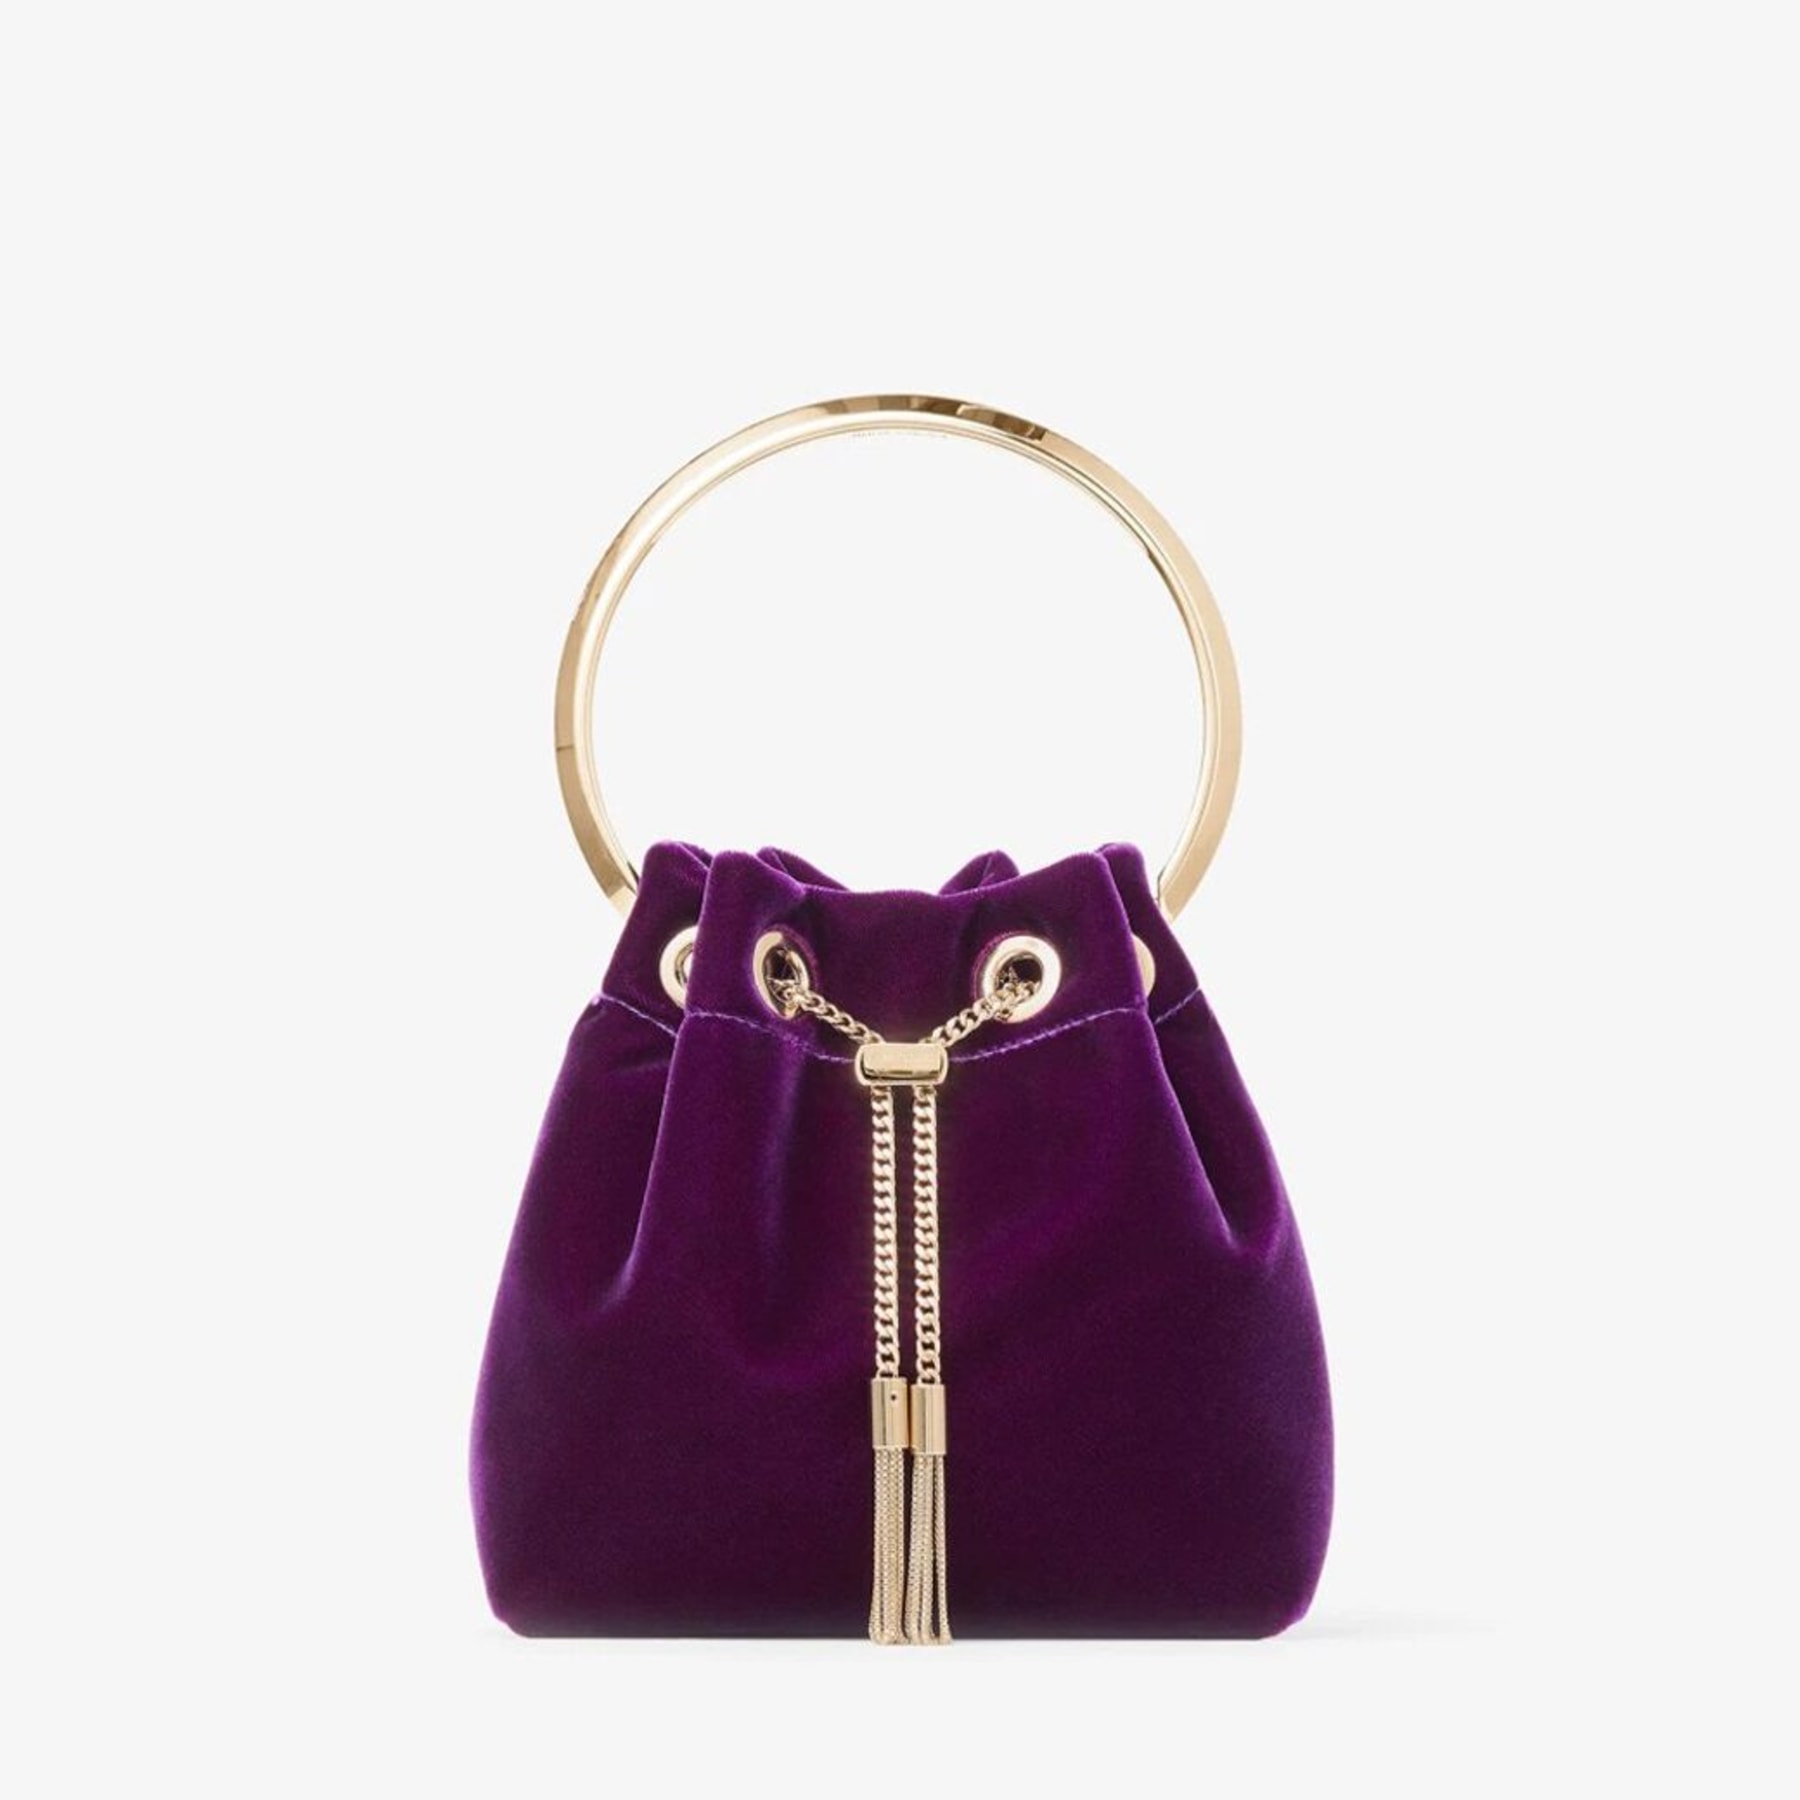 The Row's $39,000 Bag Sells Out In Stores!